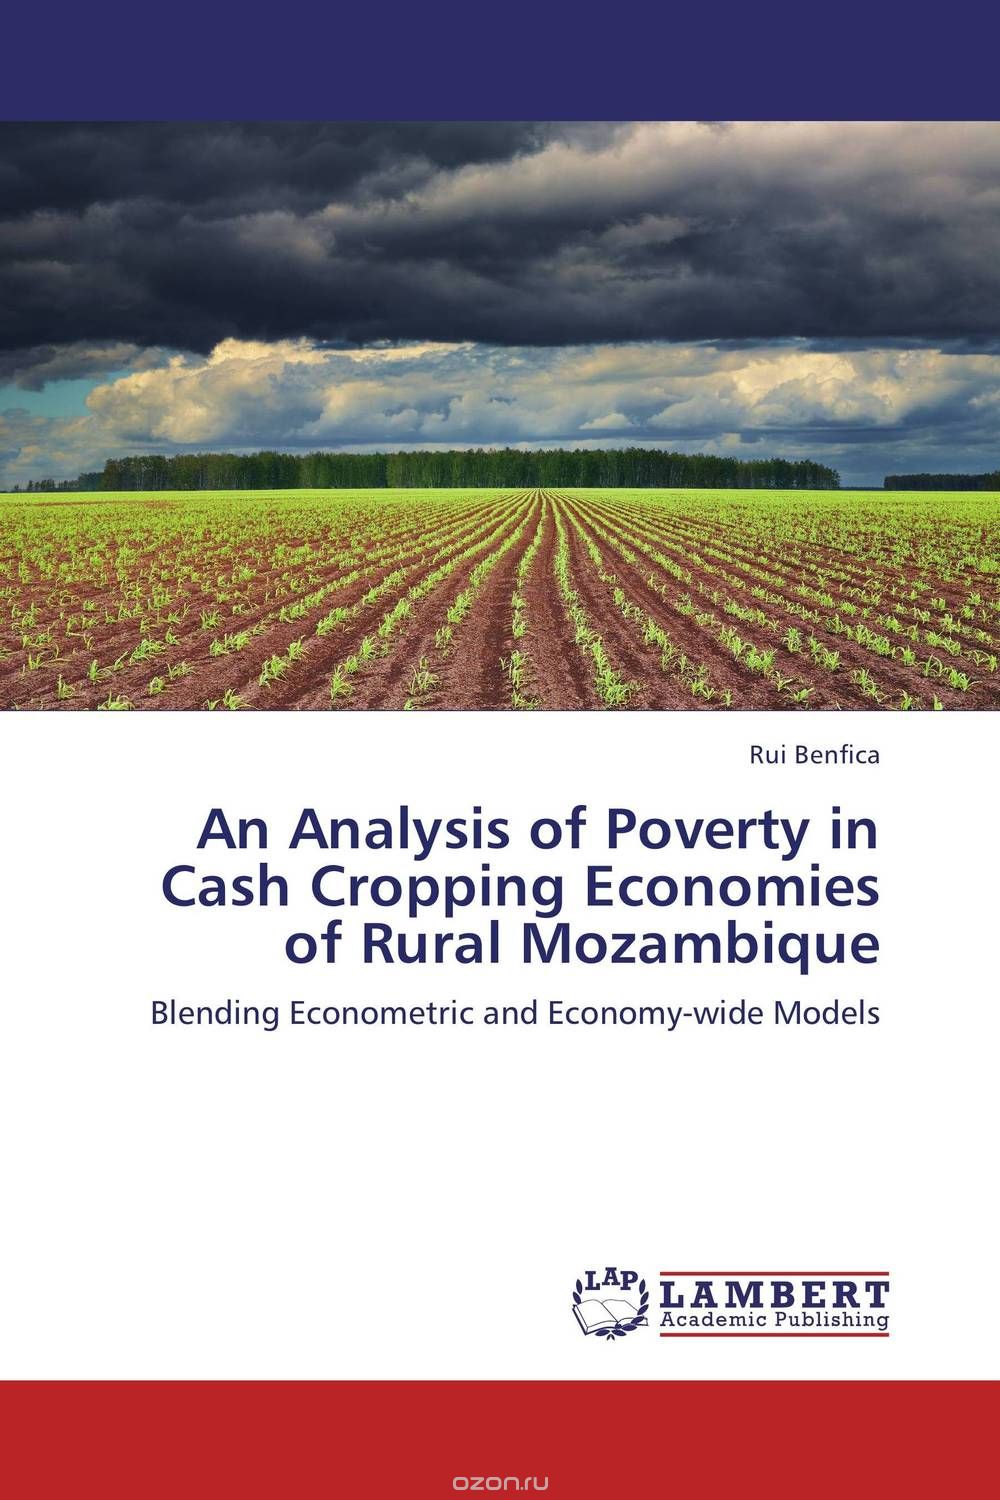 Скачать книгу "An Analysis of Poverty in Cash Cropping Economies of Rural Mozambique"